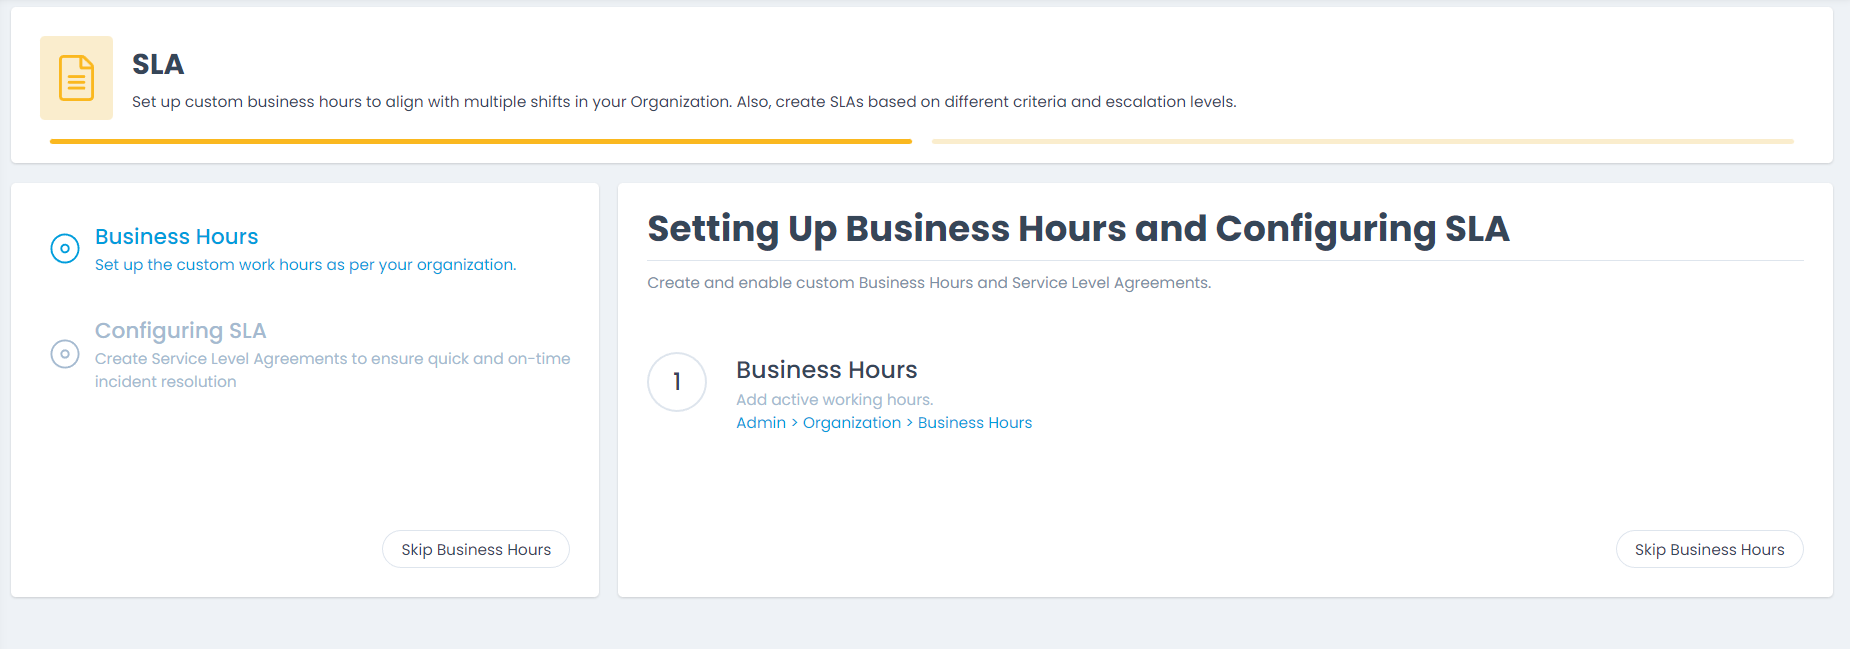 Setting Business Hours and SLAs